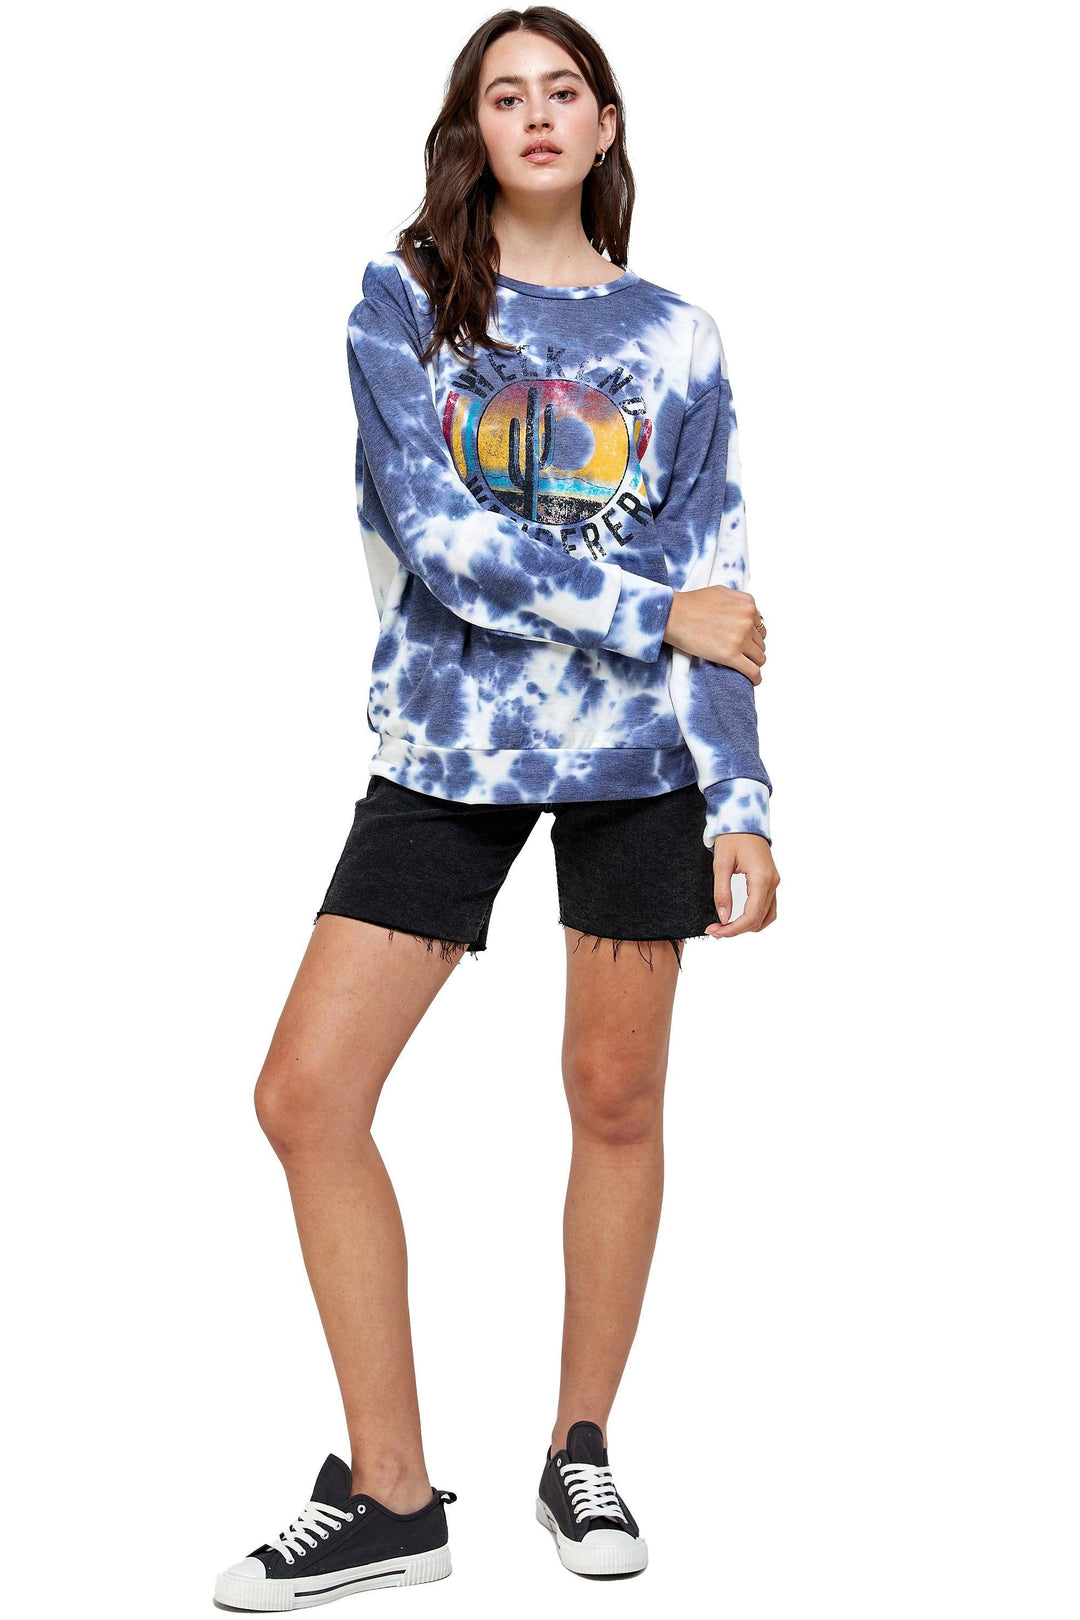 French Terry Tie Dye Screen Printed Sweatshirts - Brand My Case